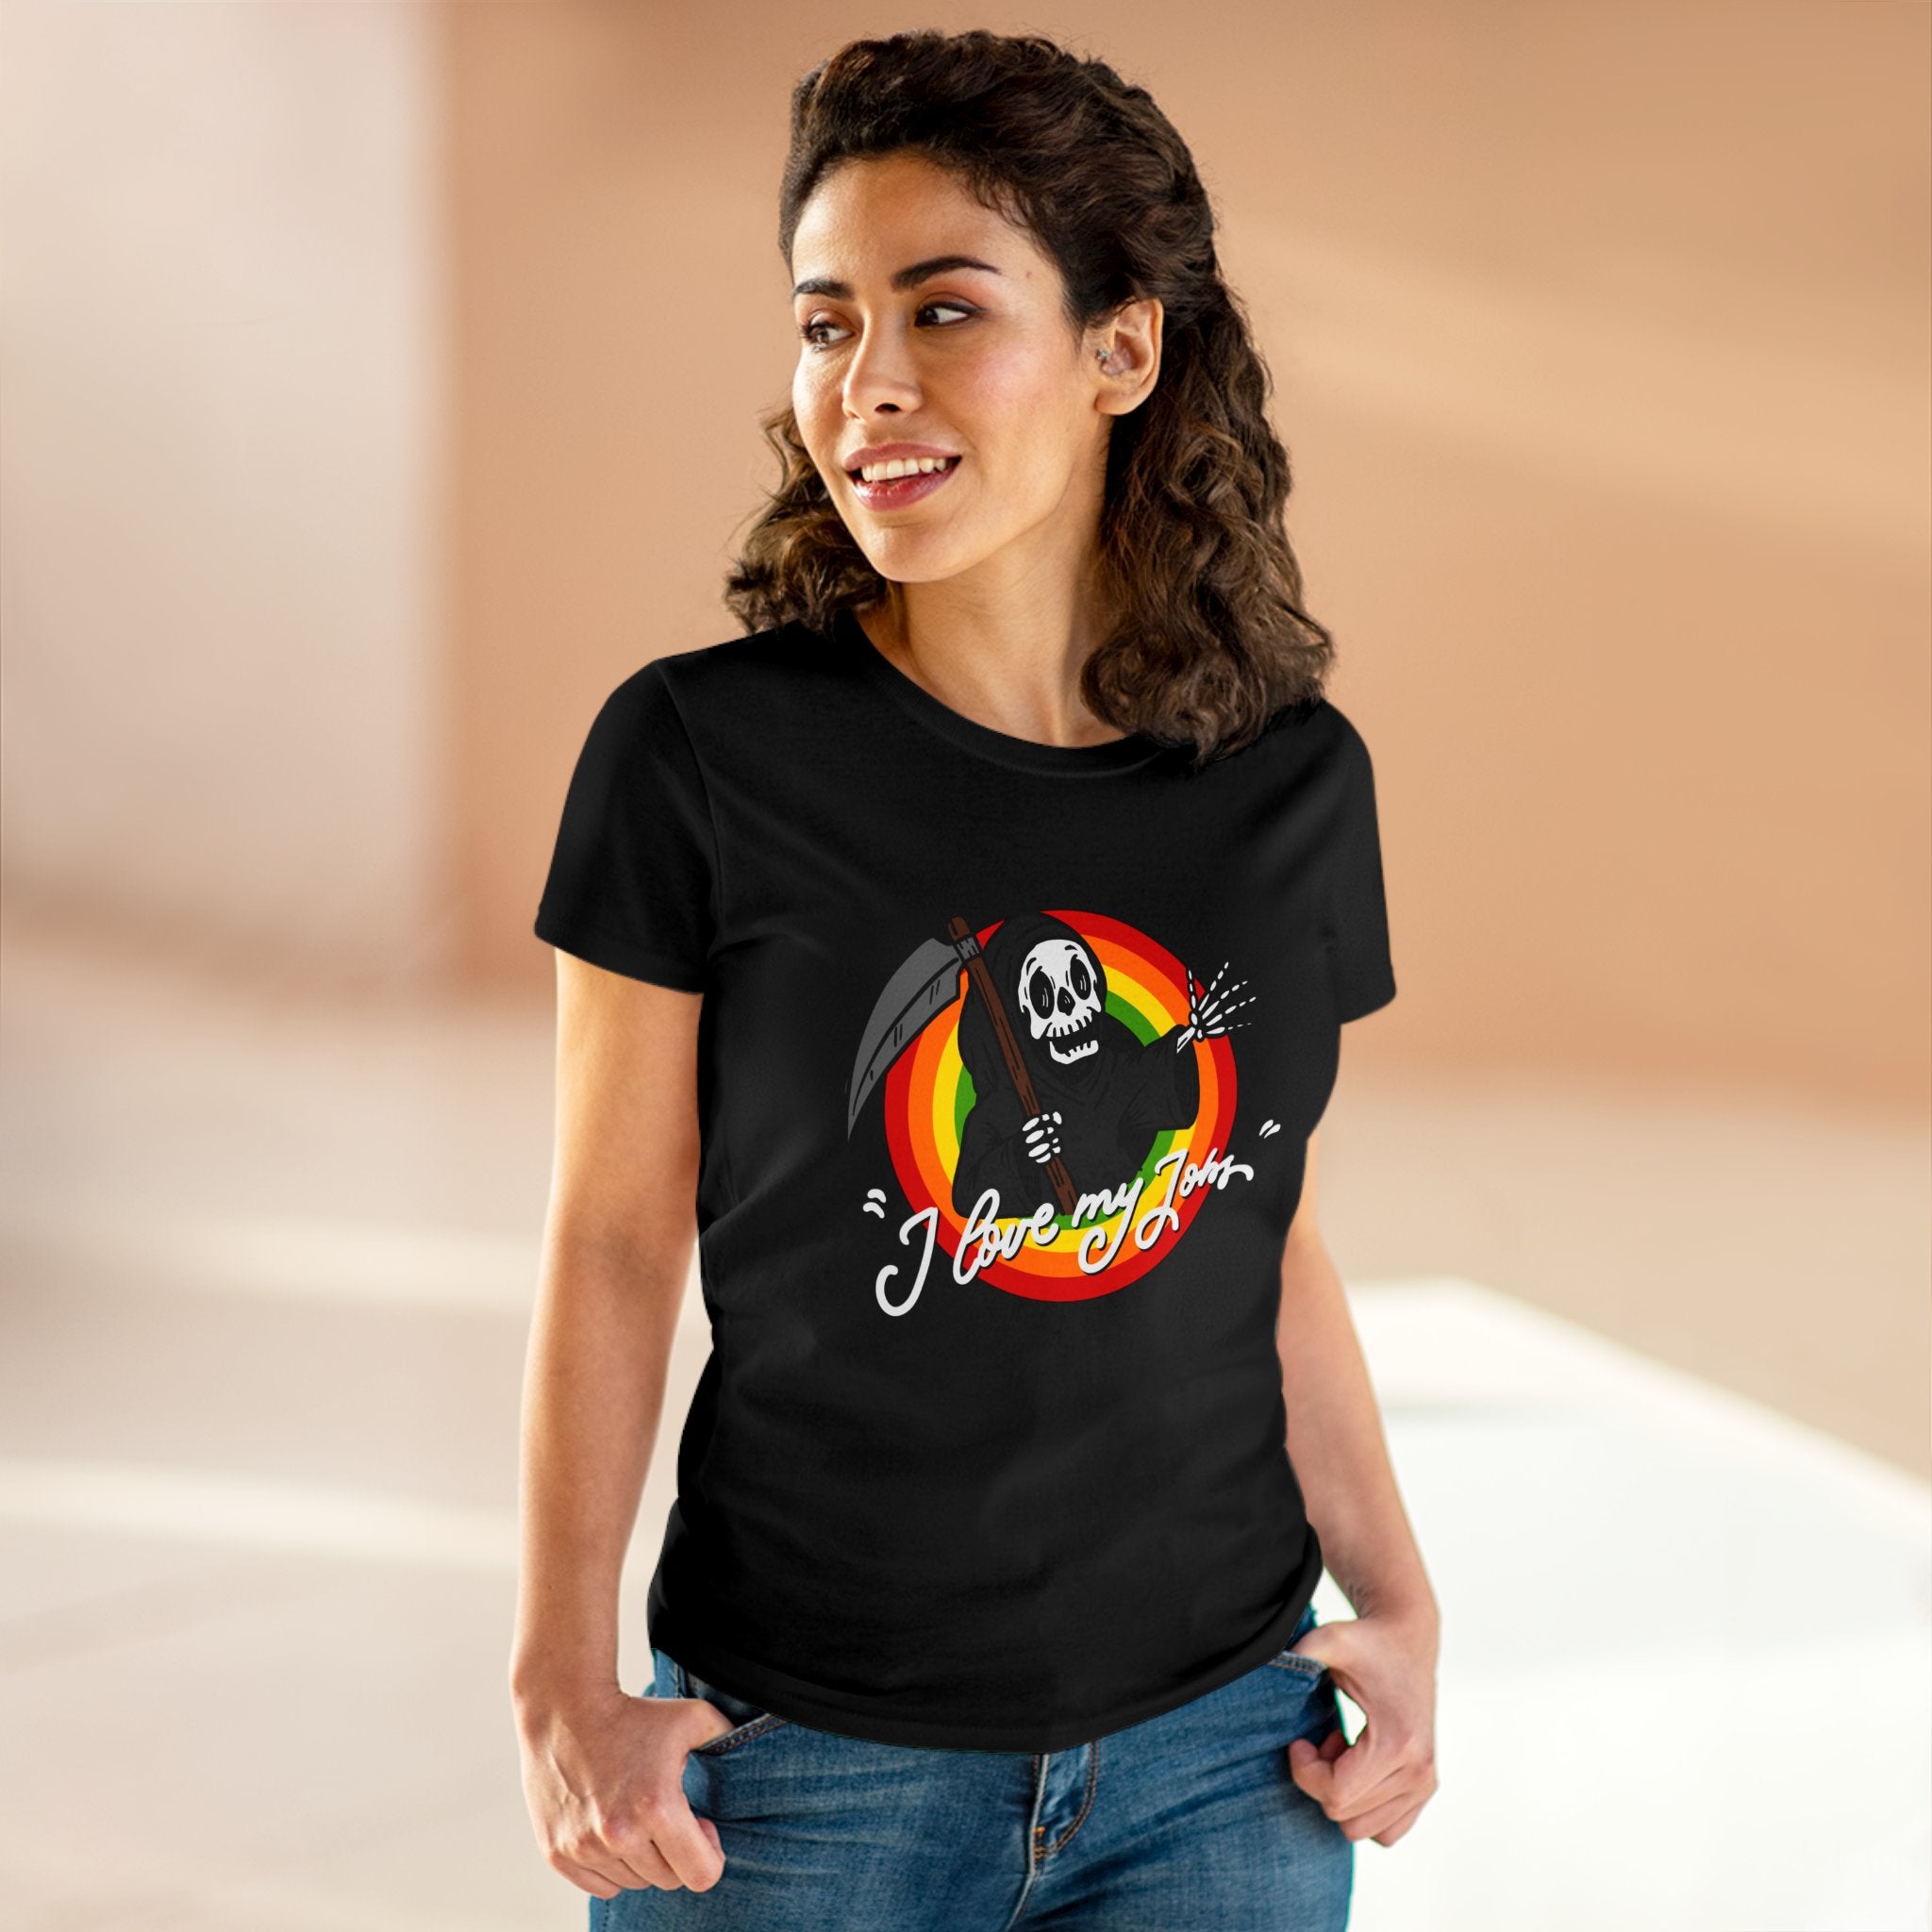 A woman with wavy hair stands indoors wearing the soft, comfortable cotton Love My Jobs - Women's Tee featuring a scythe-wielding skeleton graphic and the text "I love my job." She has her hands in her pockets and is smiling.